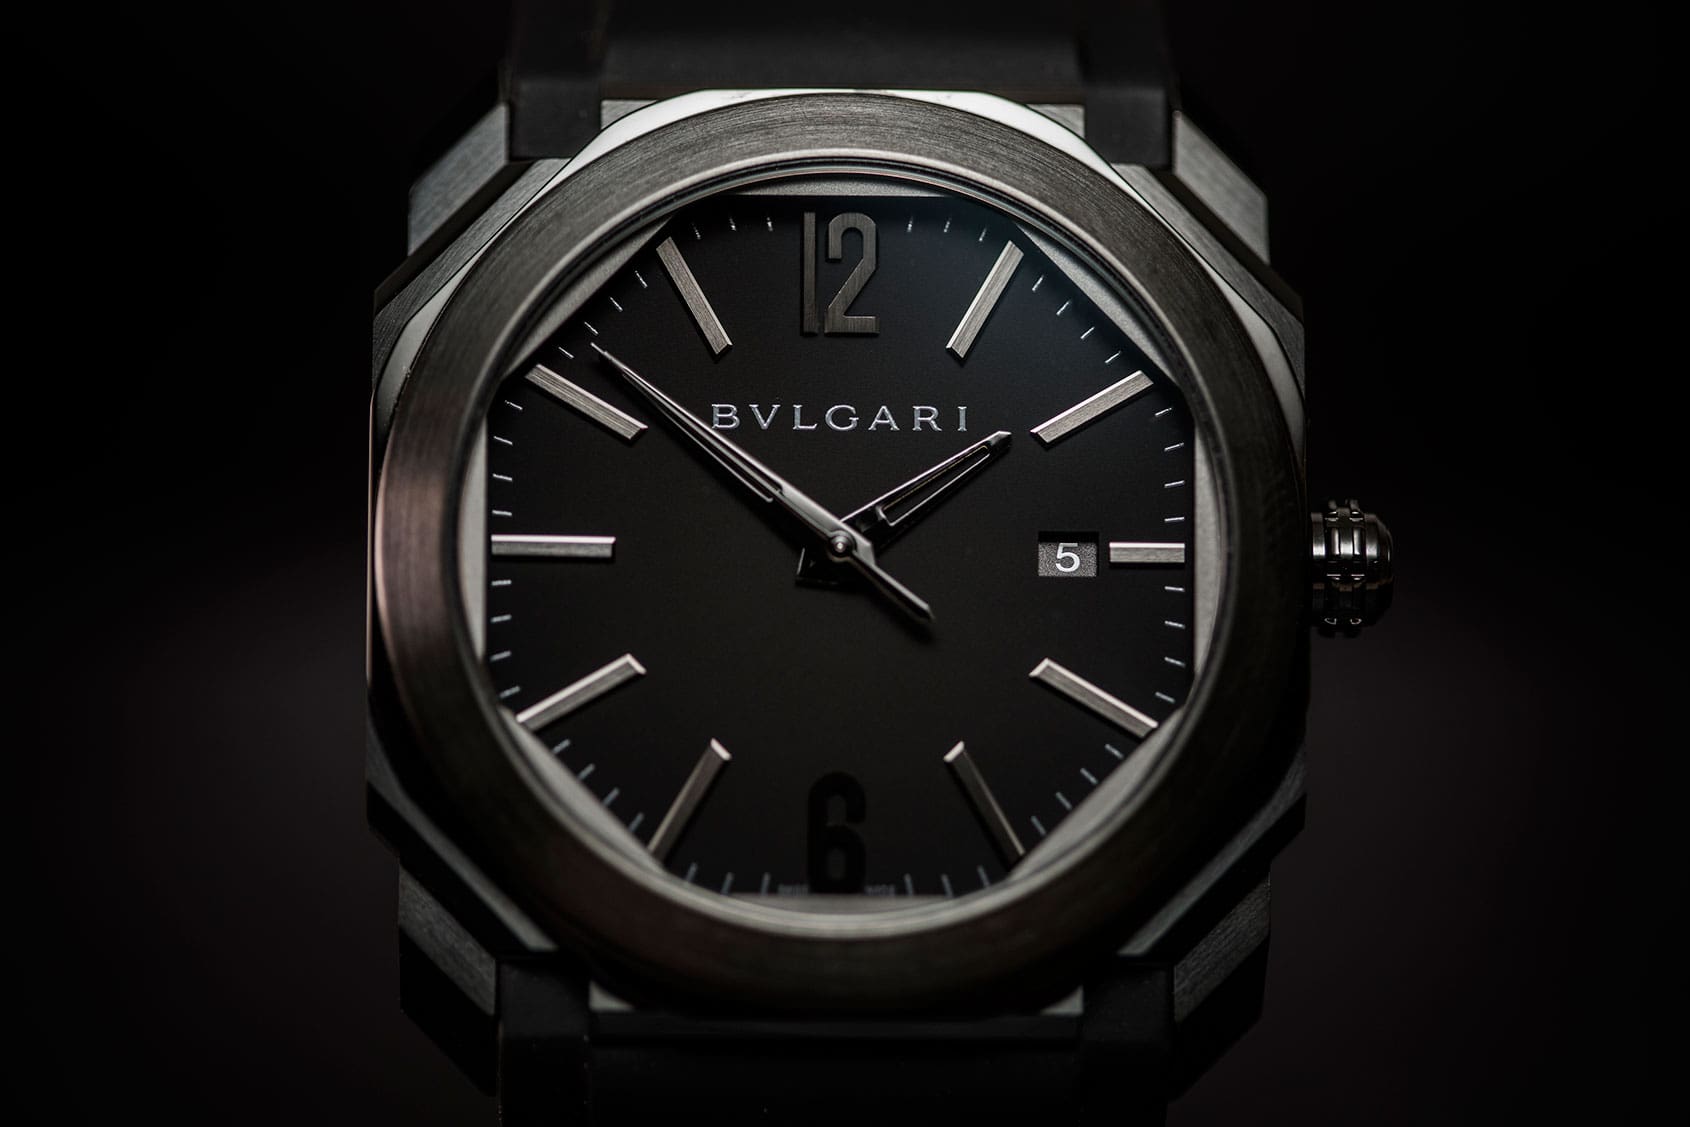 HANDS-ON: Aggressively monochrome – the blacked-out Bulgari Octo Ultranero